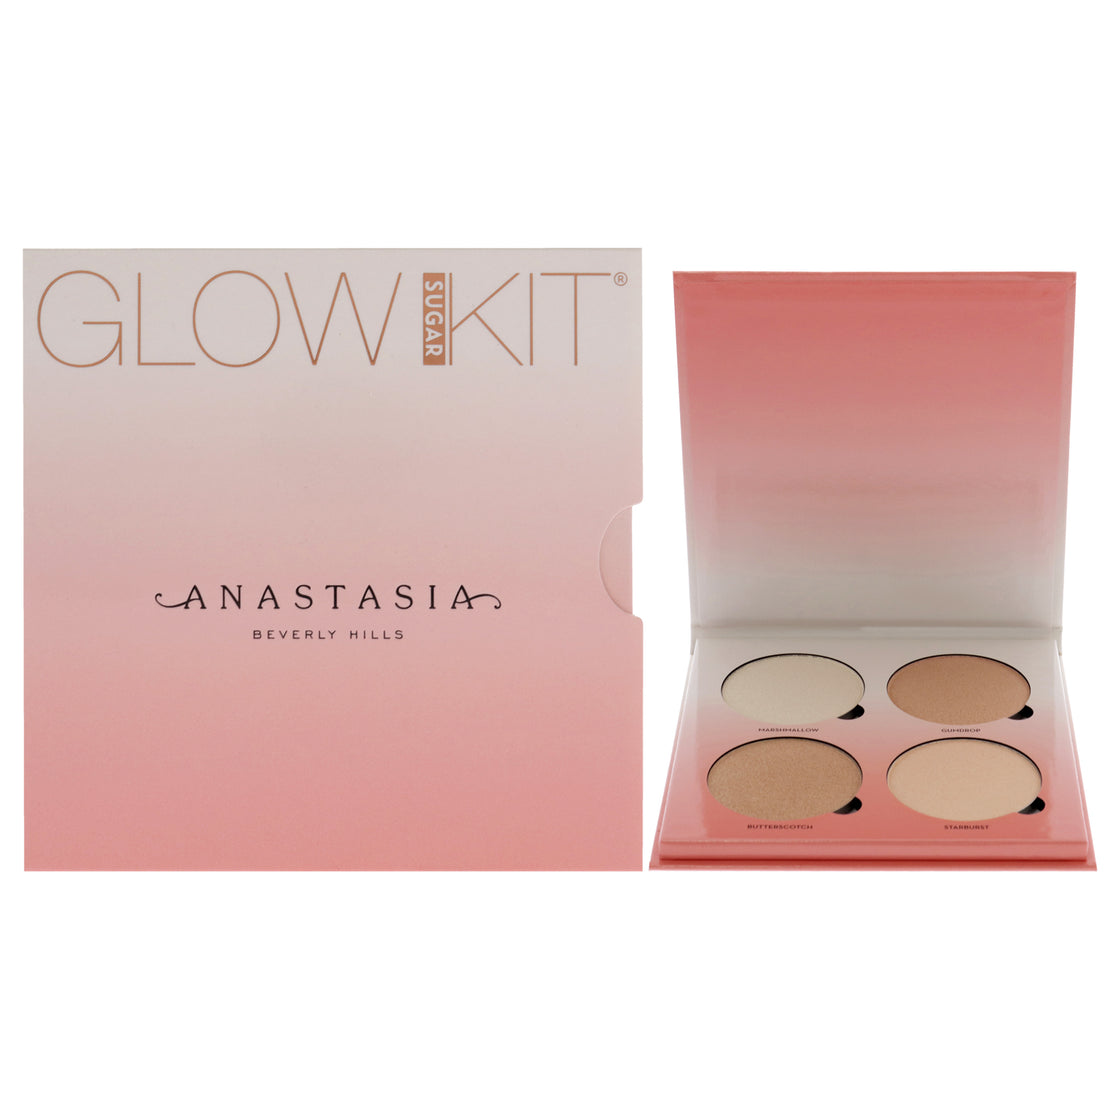 Sugar Glow Kit by Anastasia Beverly Hills for Women - 0.26 oz Highlighter